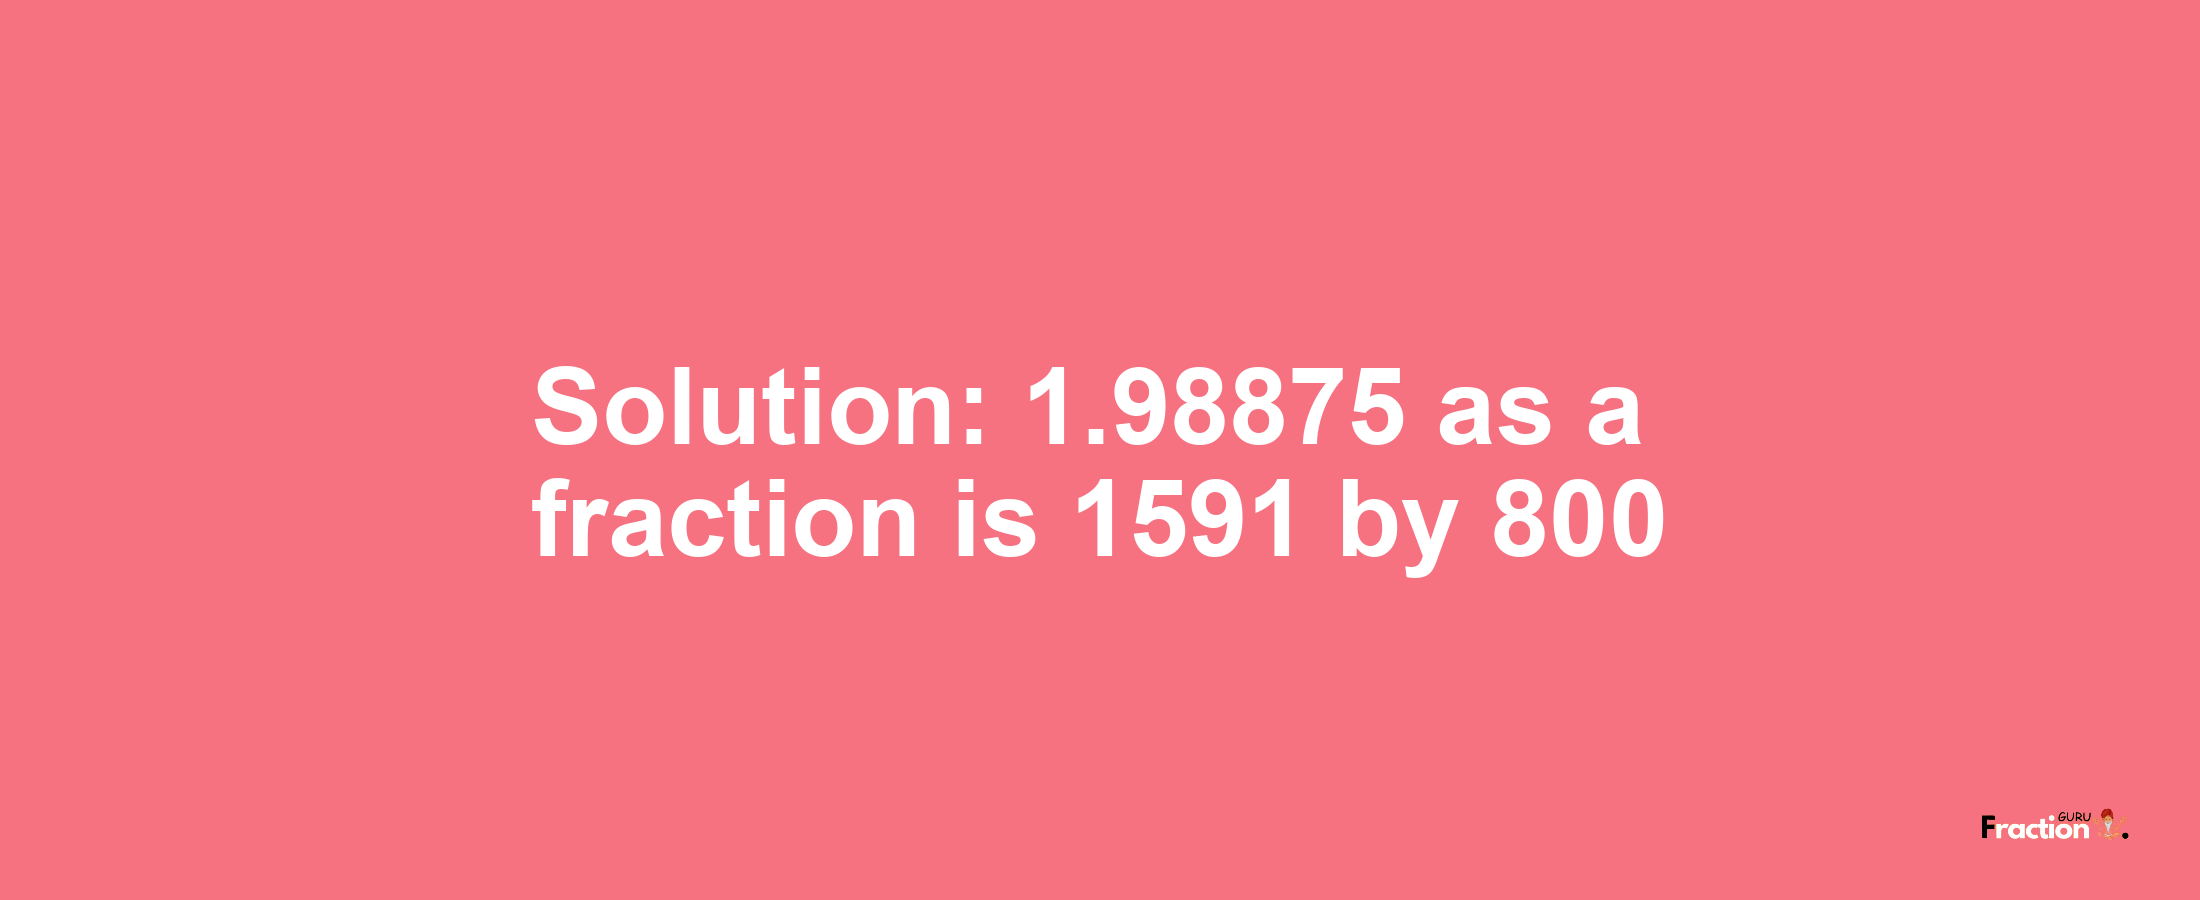 Solution:1.98875 as a fraction is 1591/800